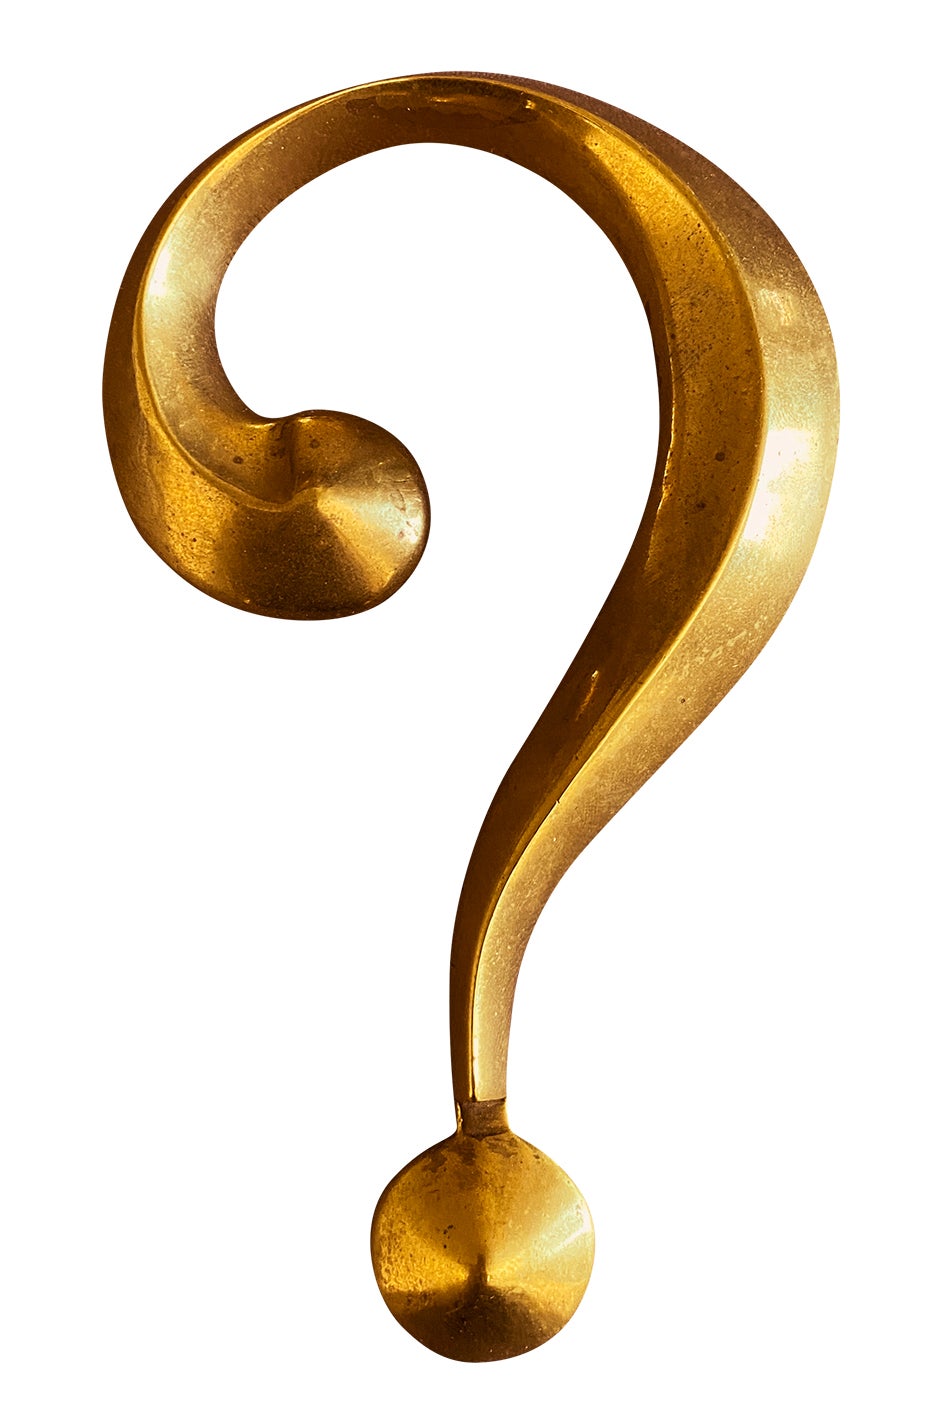 Gold metal question mark